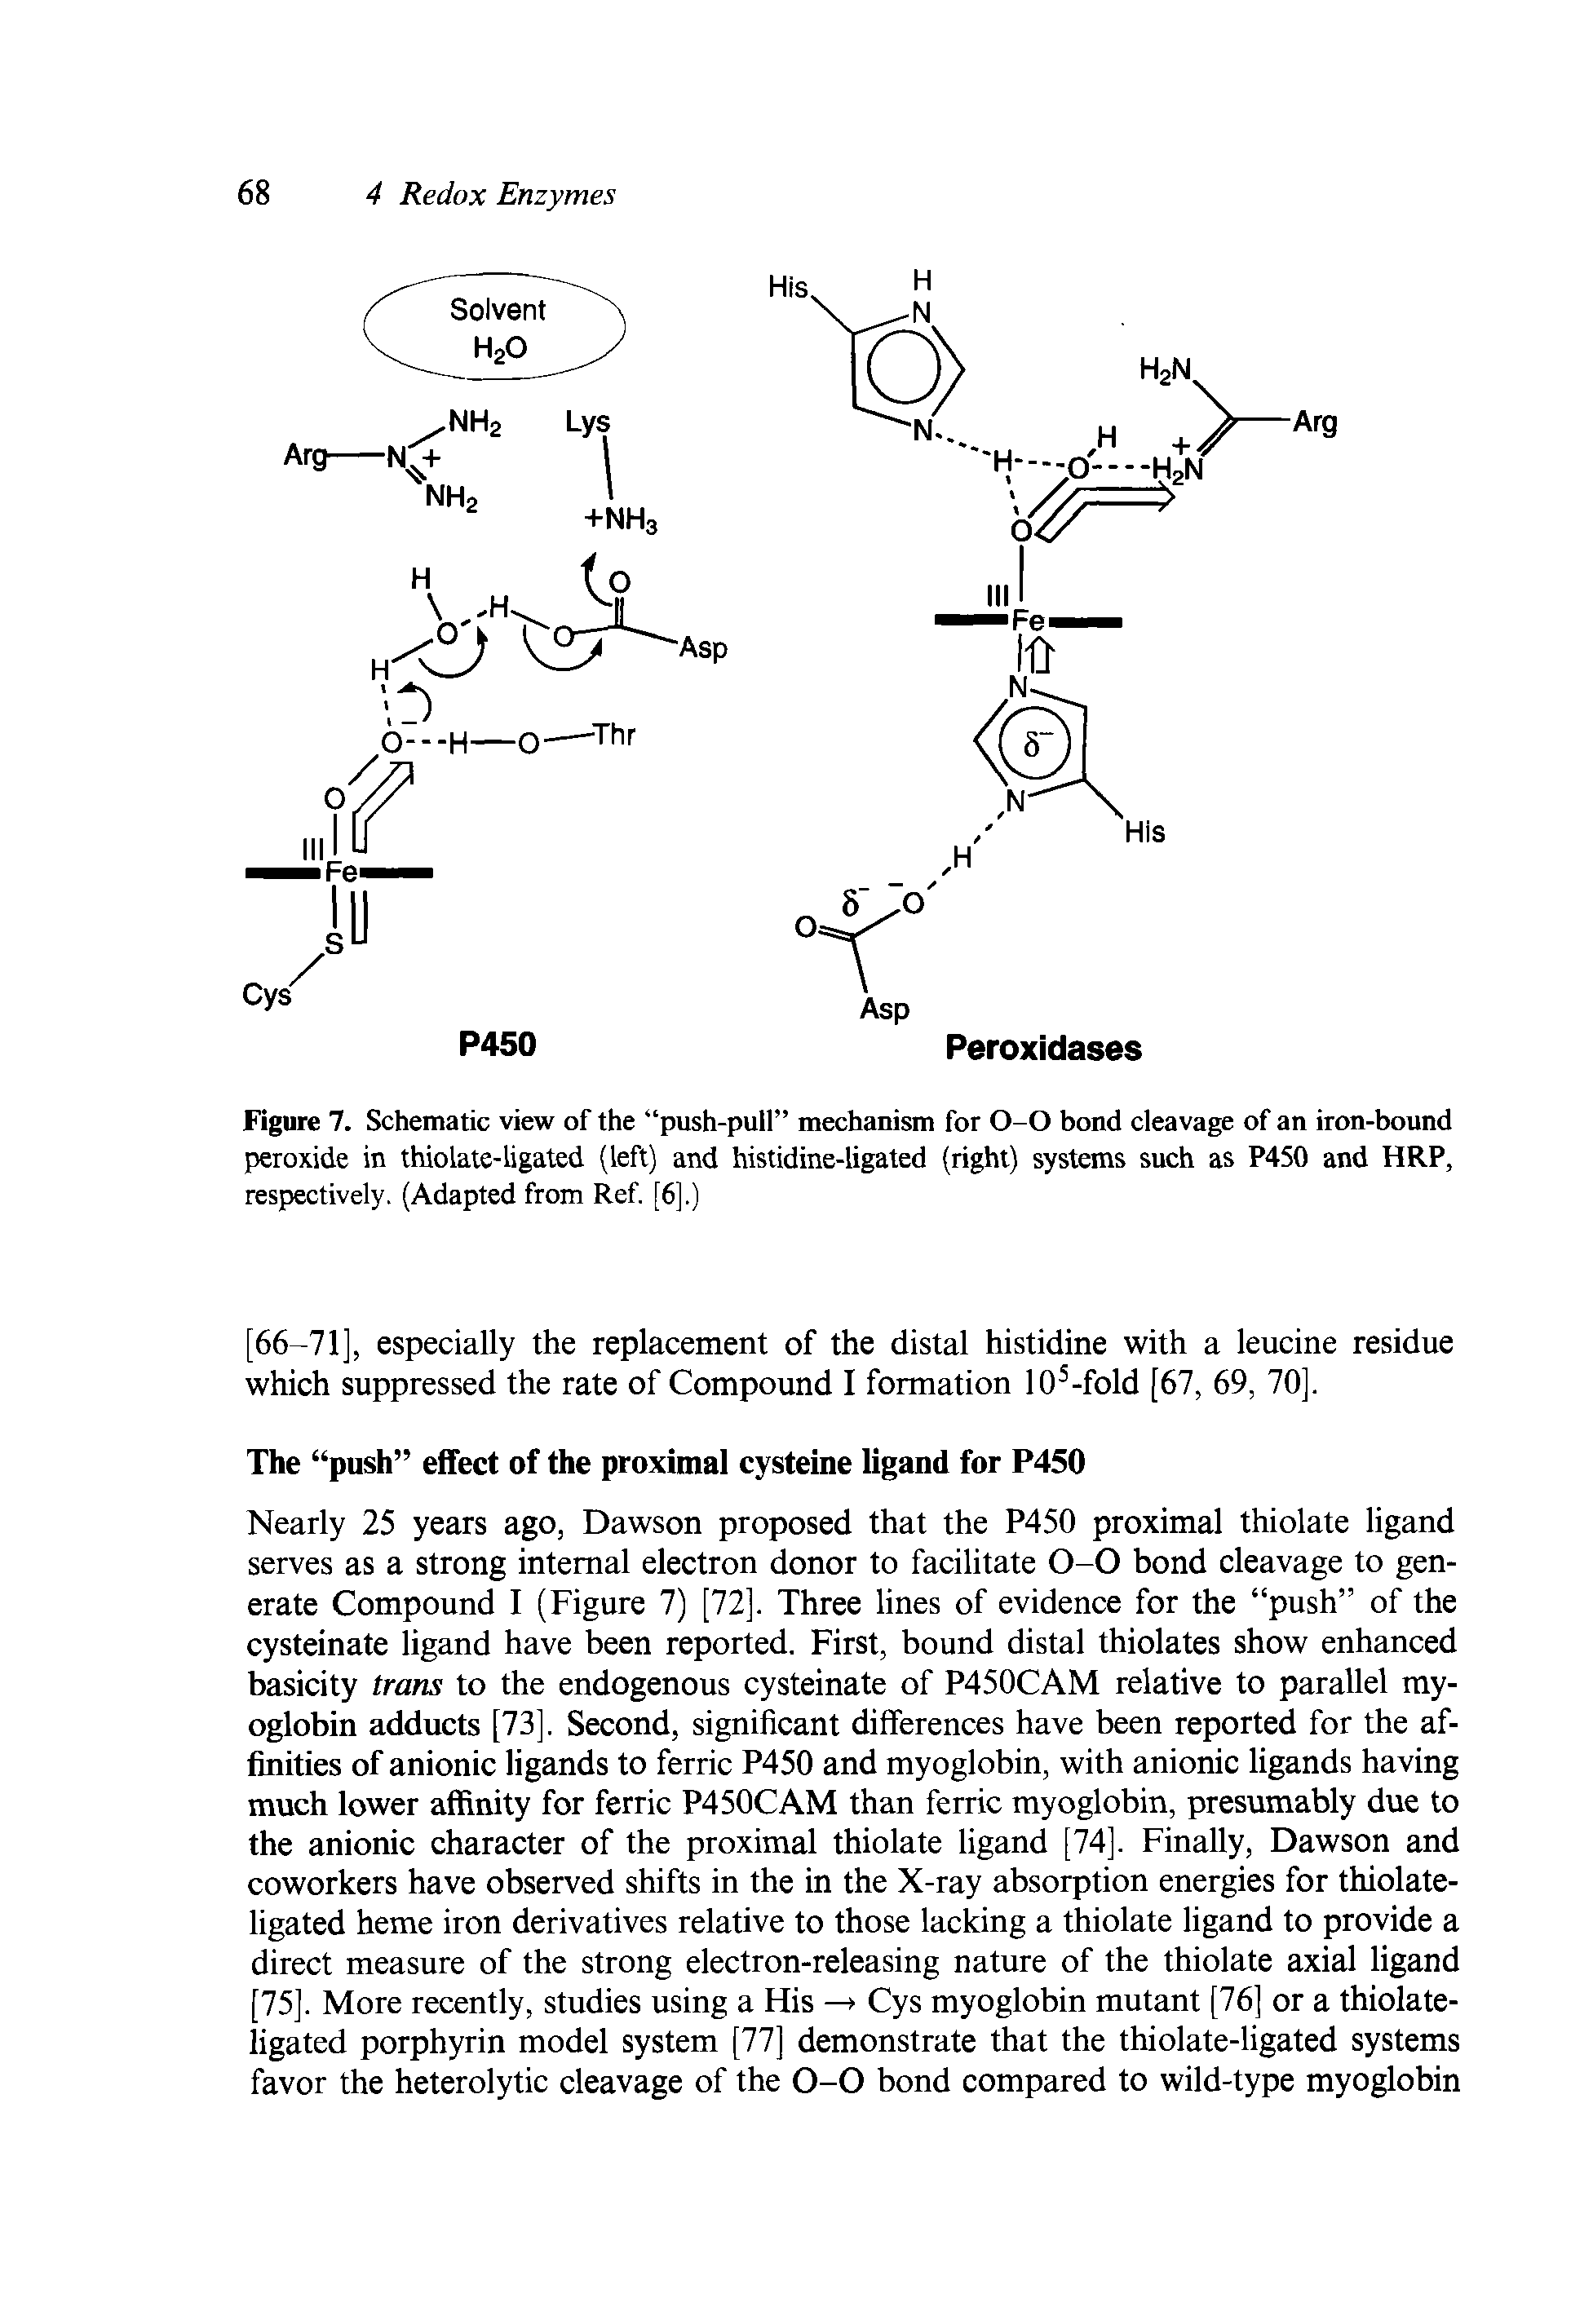 Figure 7. Schematic view of the push-pull mechanism for 0-0 bond cleavage of an iron-bound peroxide in thiolate-ligated (left) and histidine-ligated (right) systems such as P450 and HRP, respectively. (Adapted from Ref. [6].)...